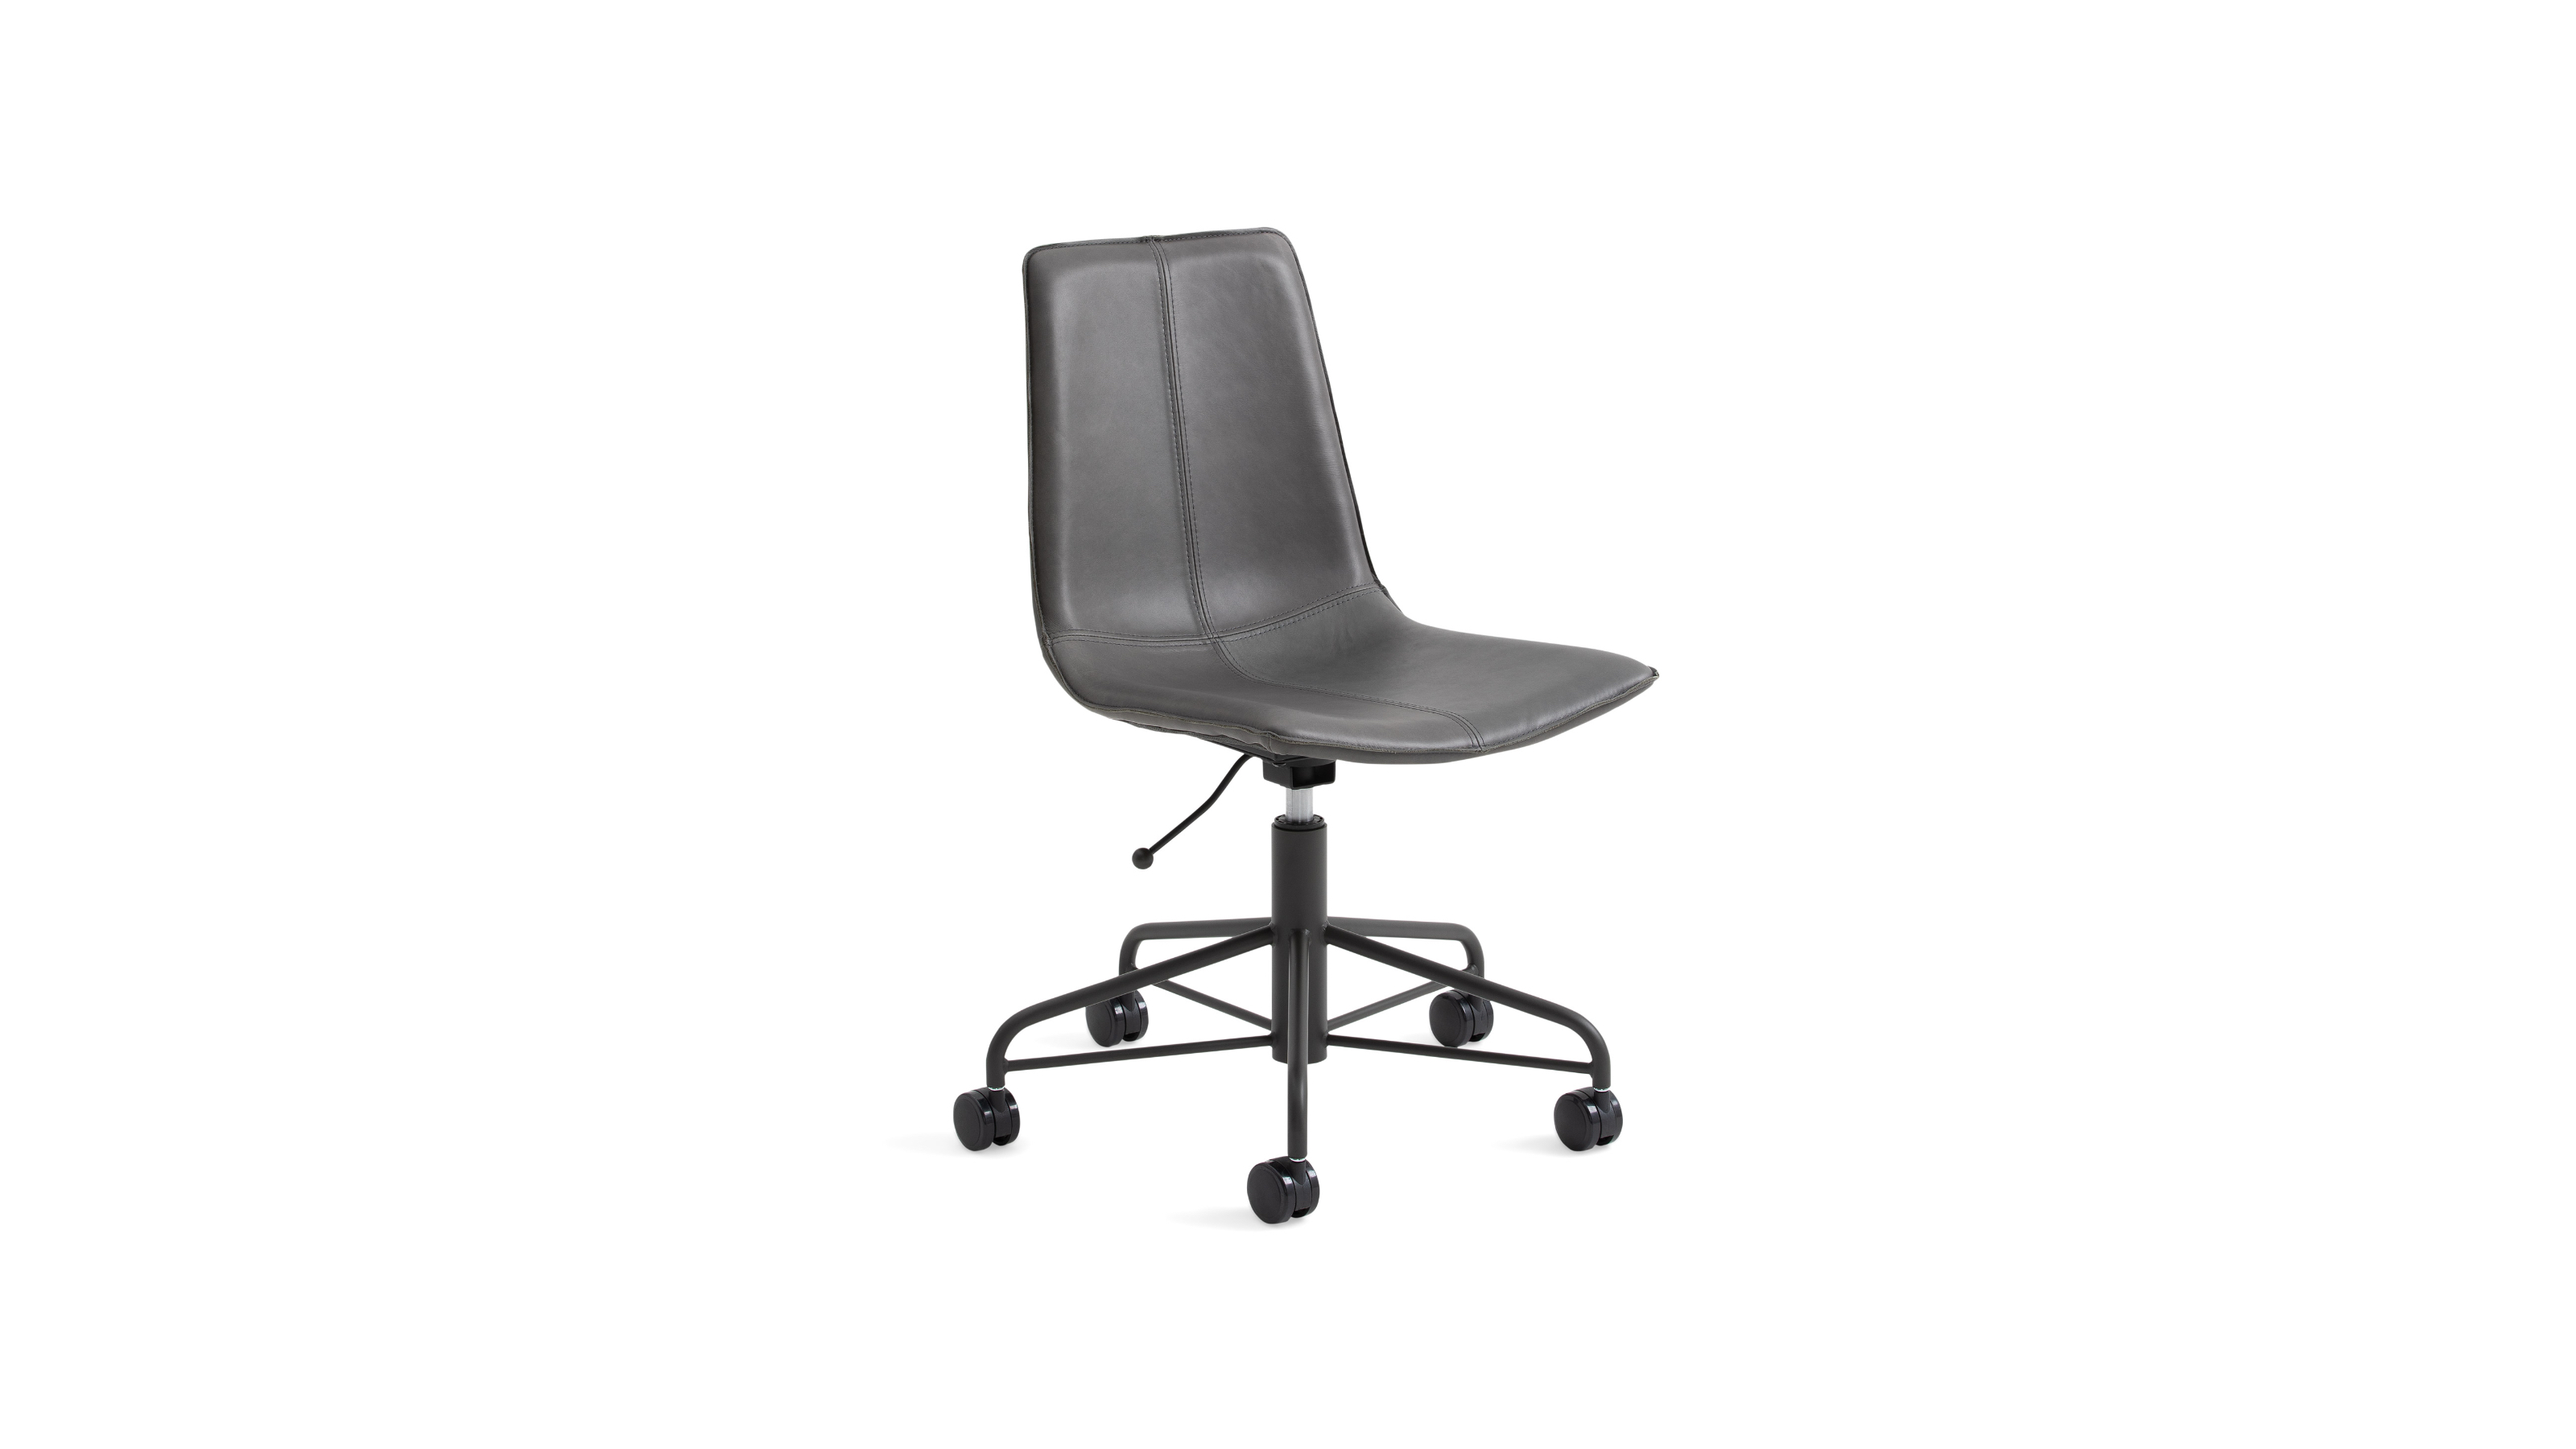 Buy online Slope Leather Swivel Office Chair now